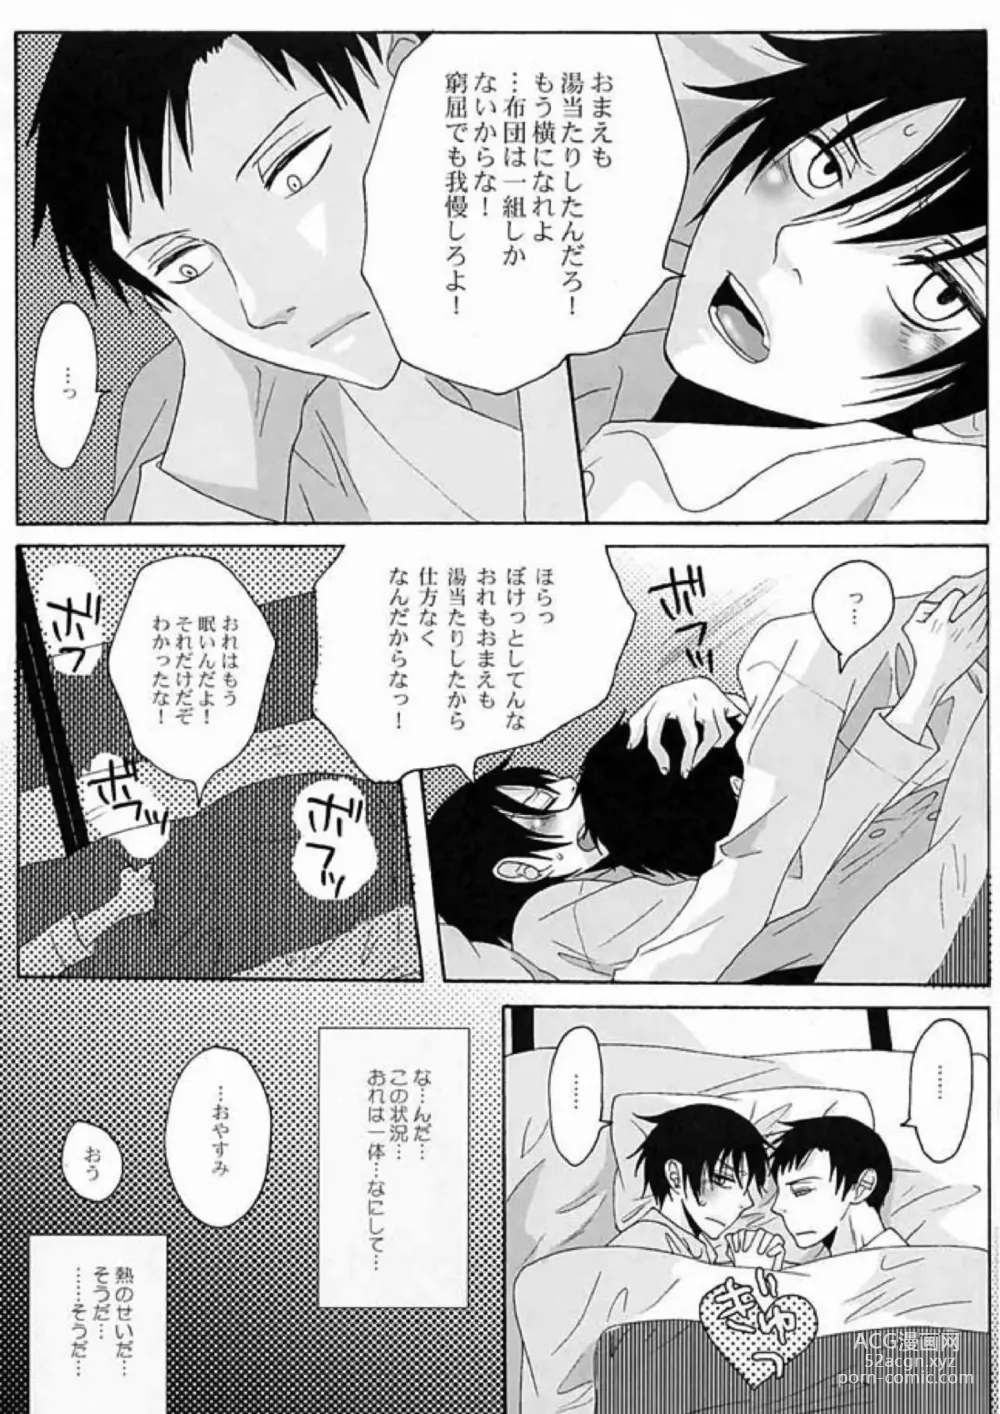 Page 22 of doujinshi PARTY LOVE 104 LIFE!